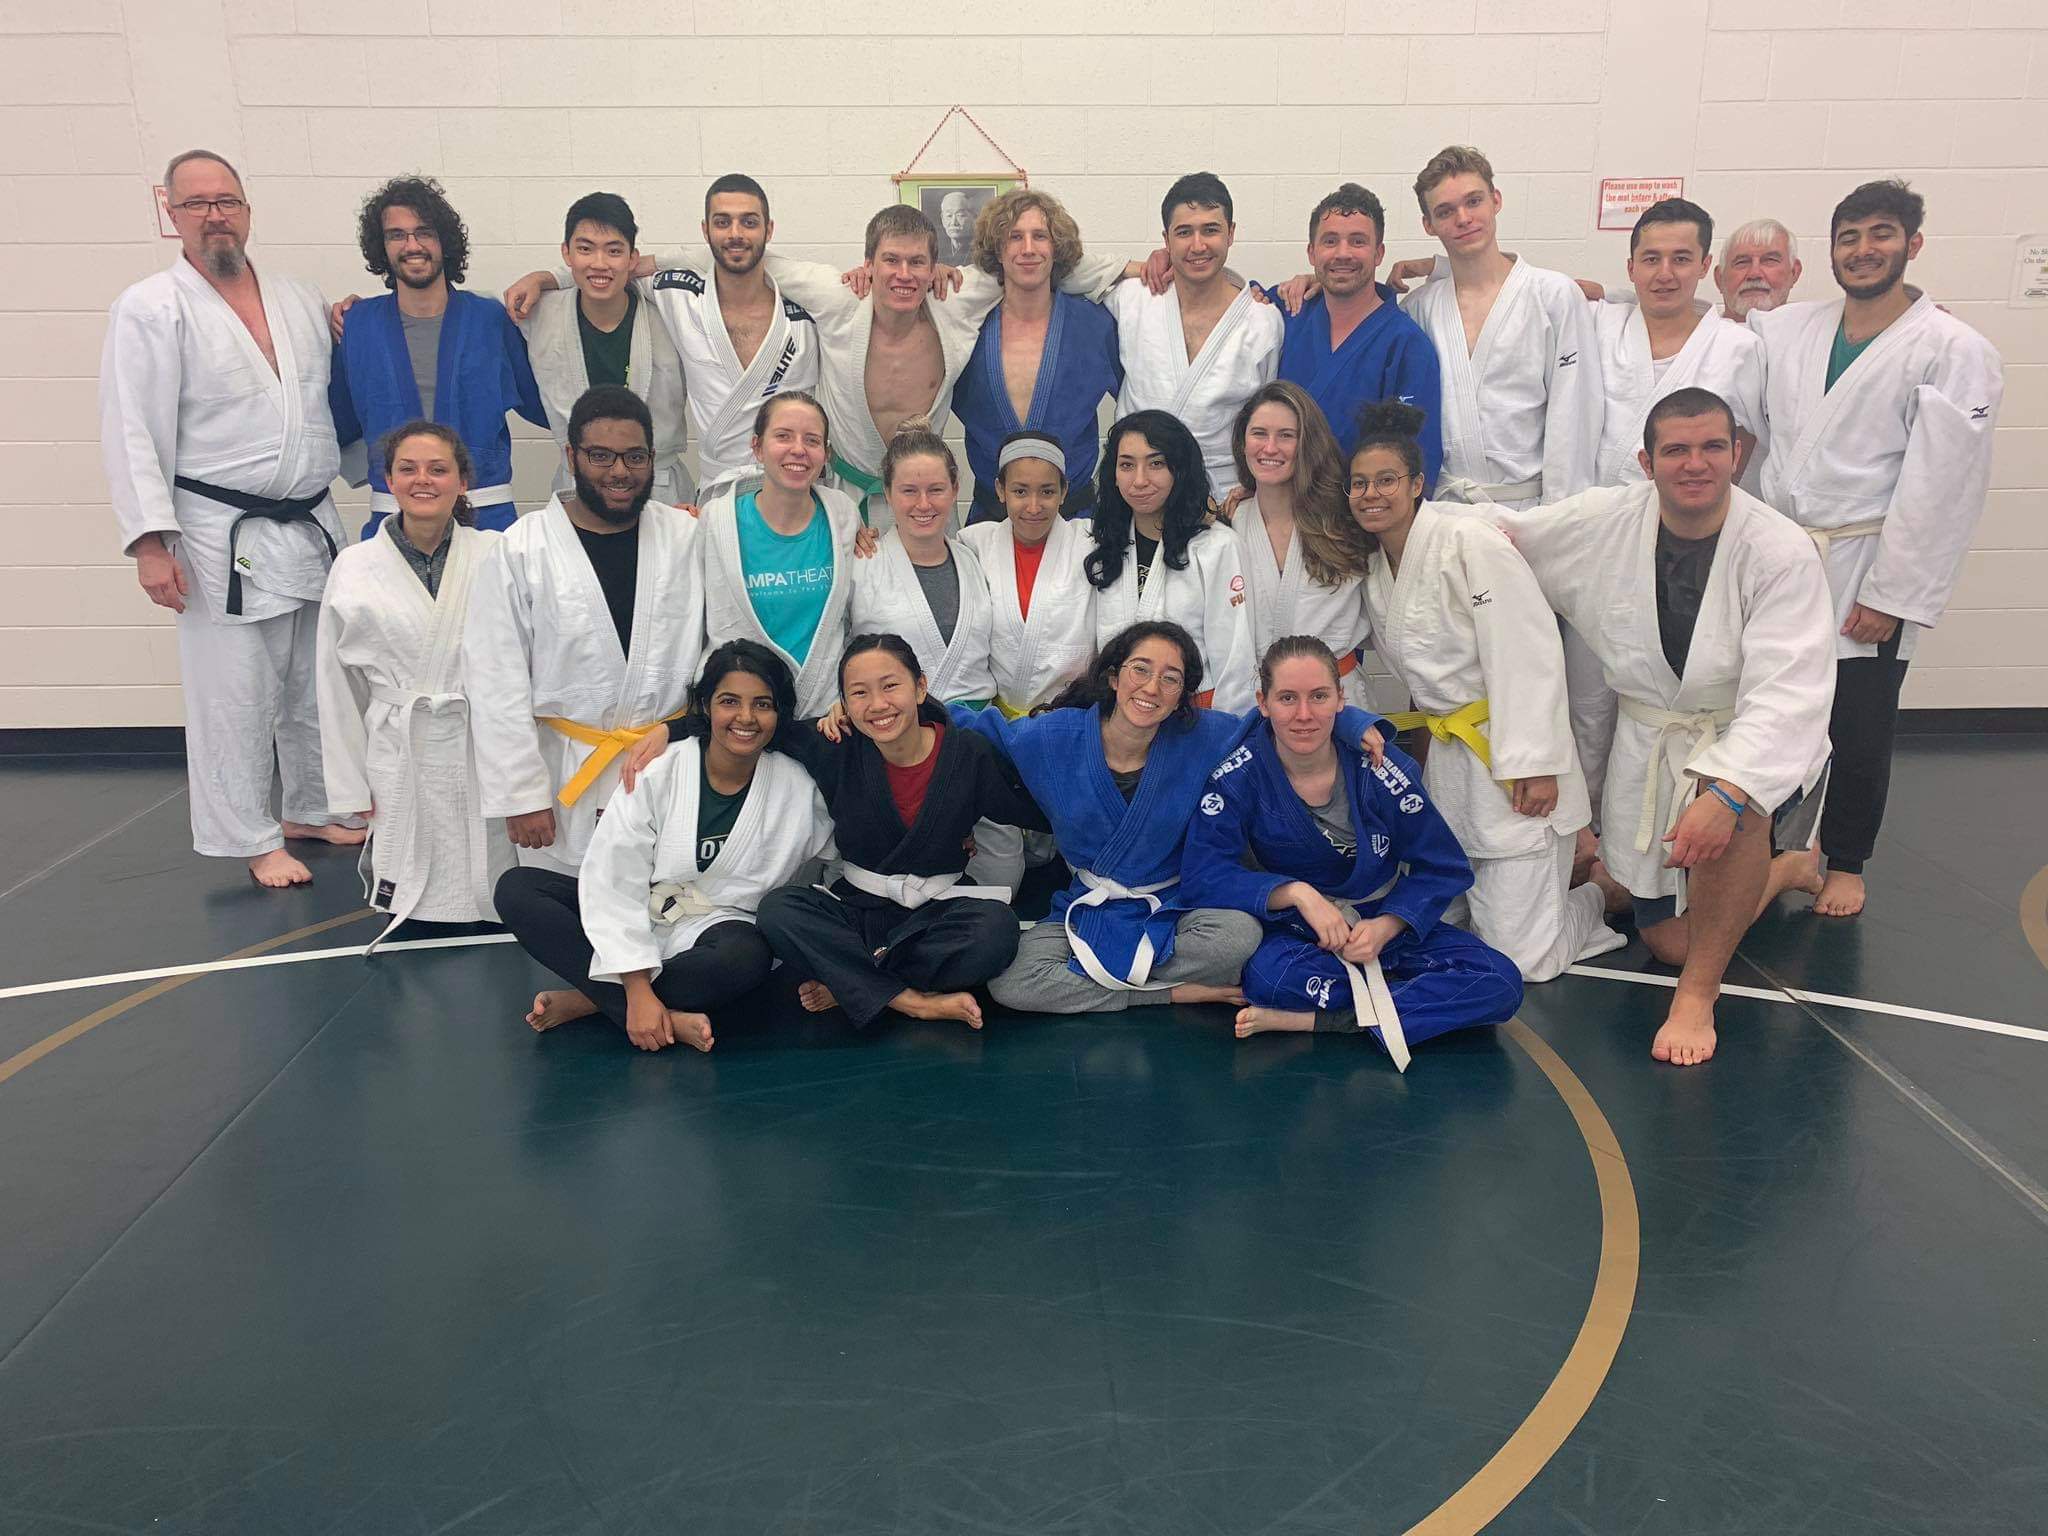 A group of members of the USF Judo Club.  LaRoyce Covington Jr is in the middle row, second from the left, wearing the traditional judogi tied with a yellow belt